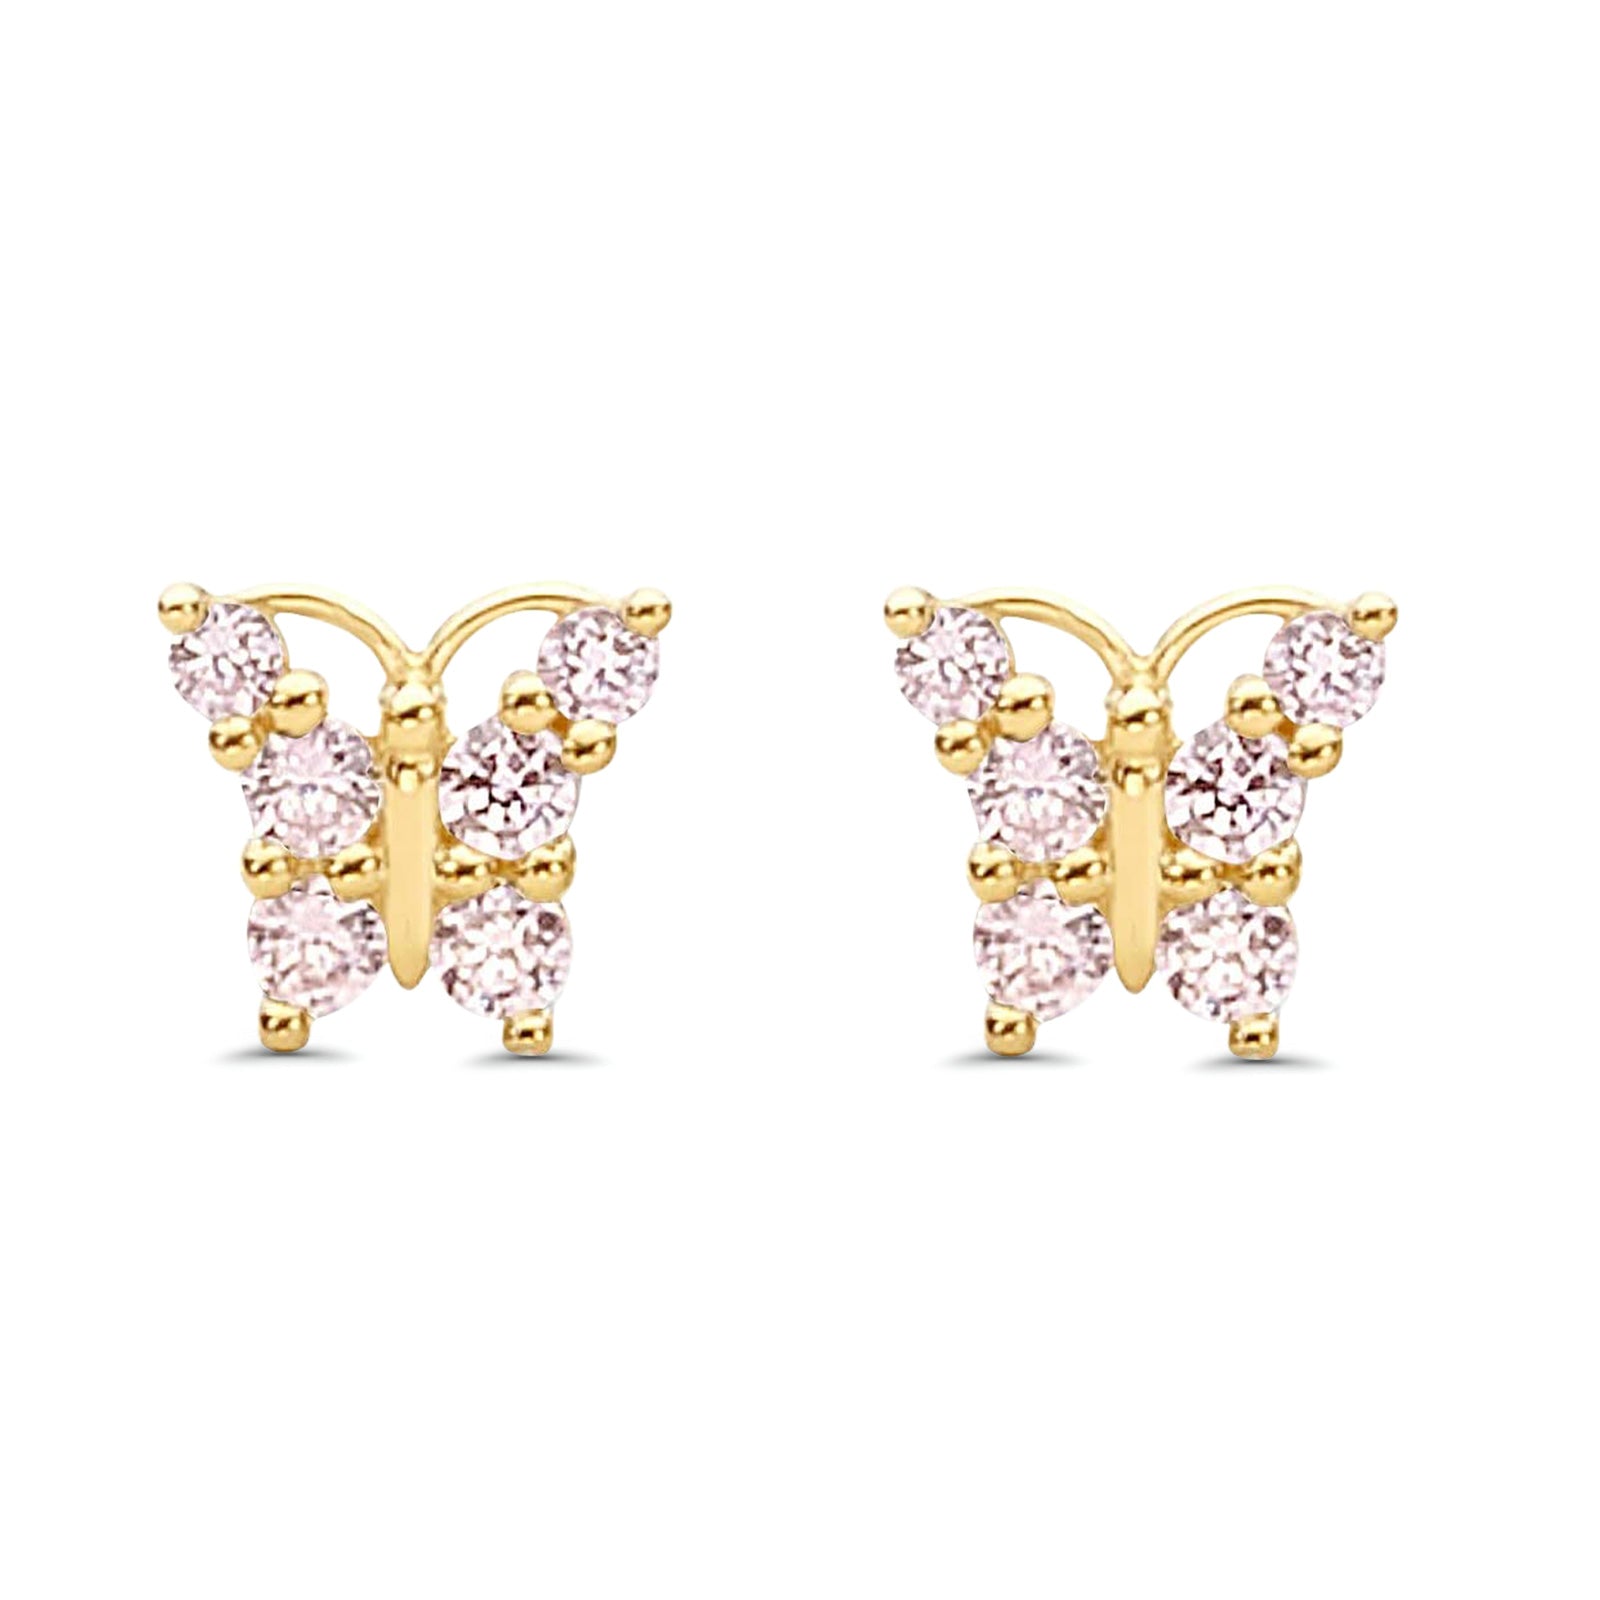 14K Yellow Gold Butterfly Stud Earrings with Screw Back - 2 Different Size Available, Best Anniversary Birthday Gift for Her